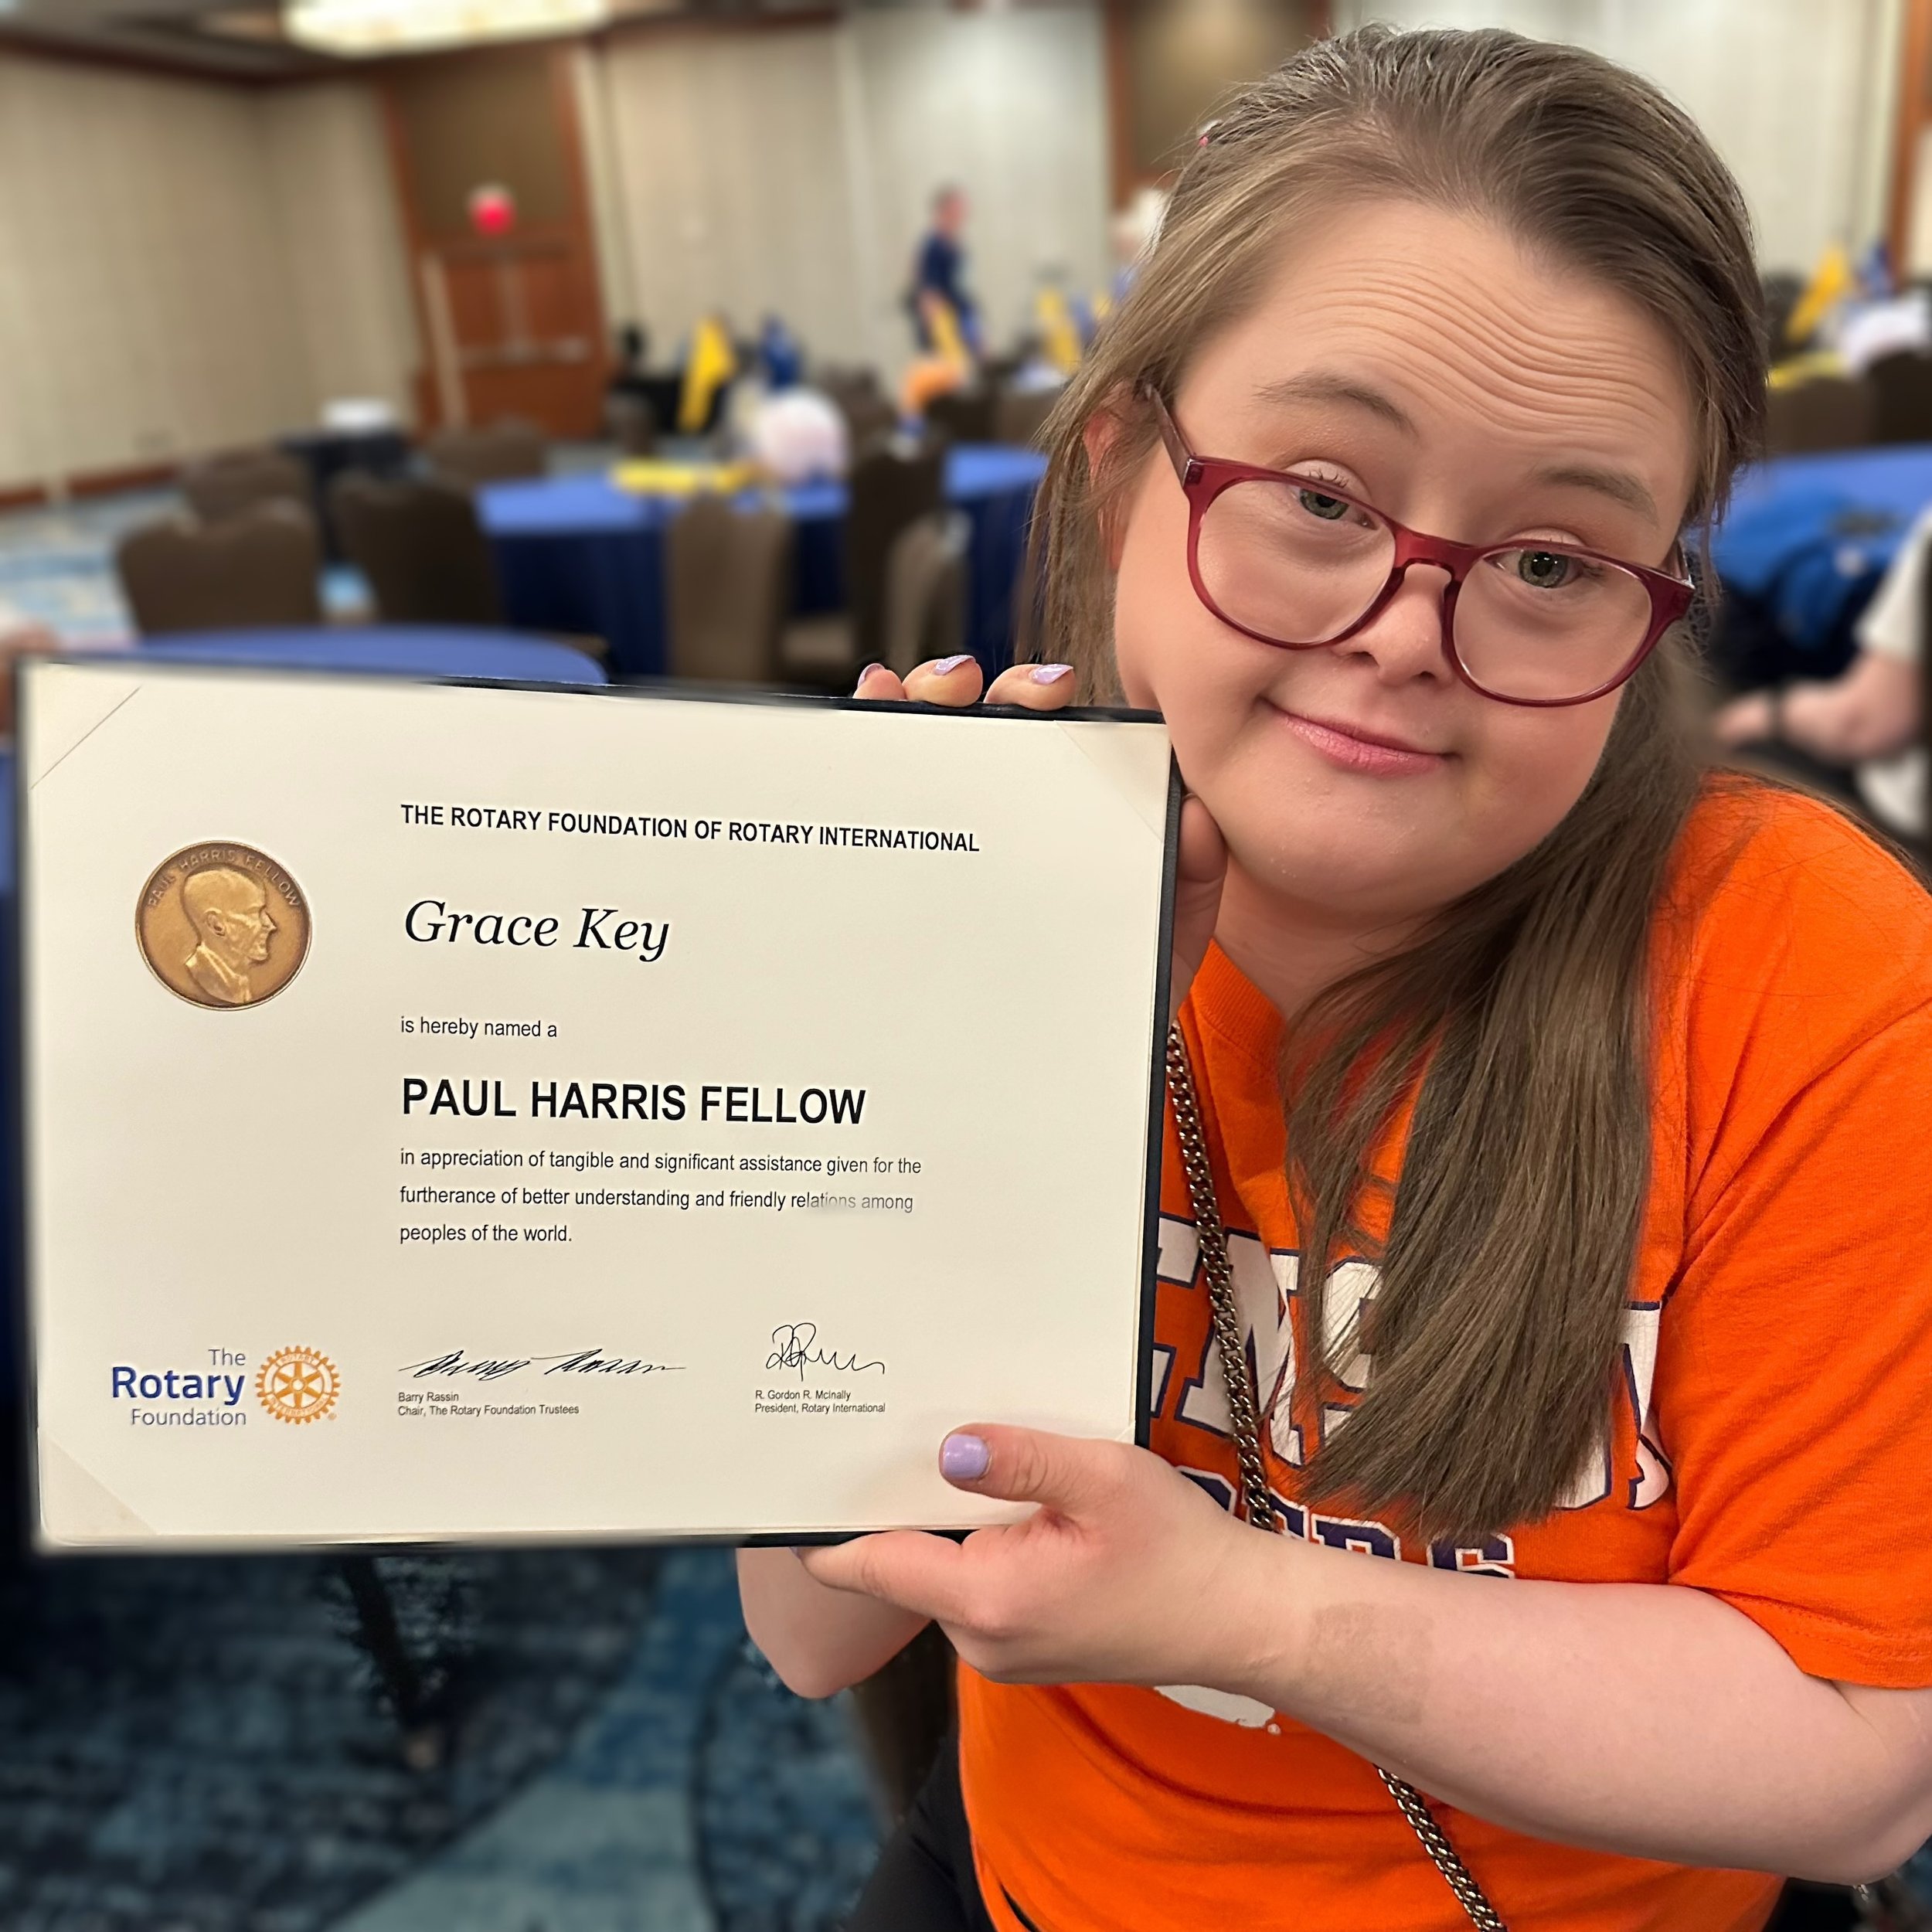 What an incredible surprise and honor for Grace to be bestowed with the Paul Harris Fellow award this weekend after she presented the keynote in Greenville, SC. 

This is seldom bestowed upon someone who is not in Rotary. It recognizes and honors ind